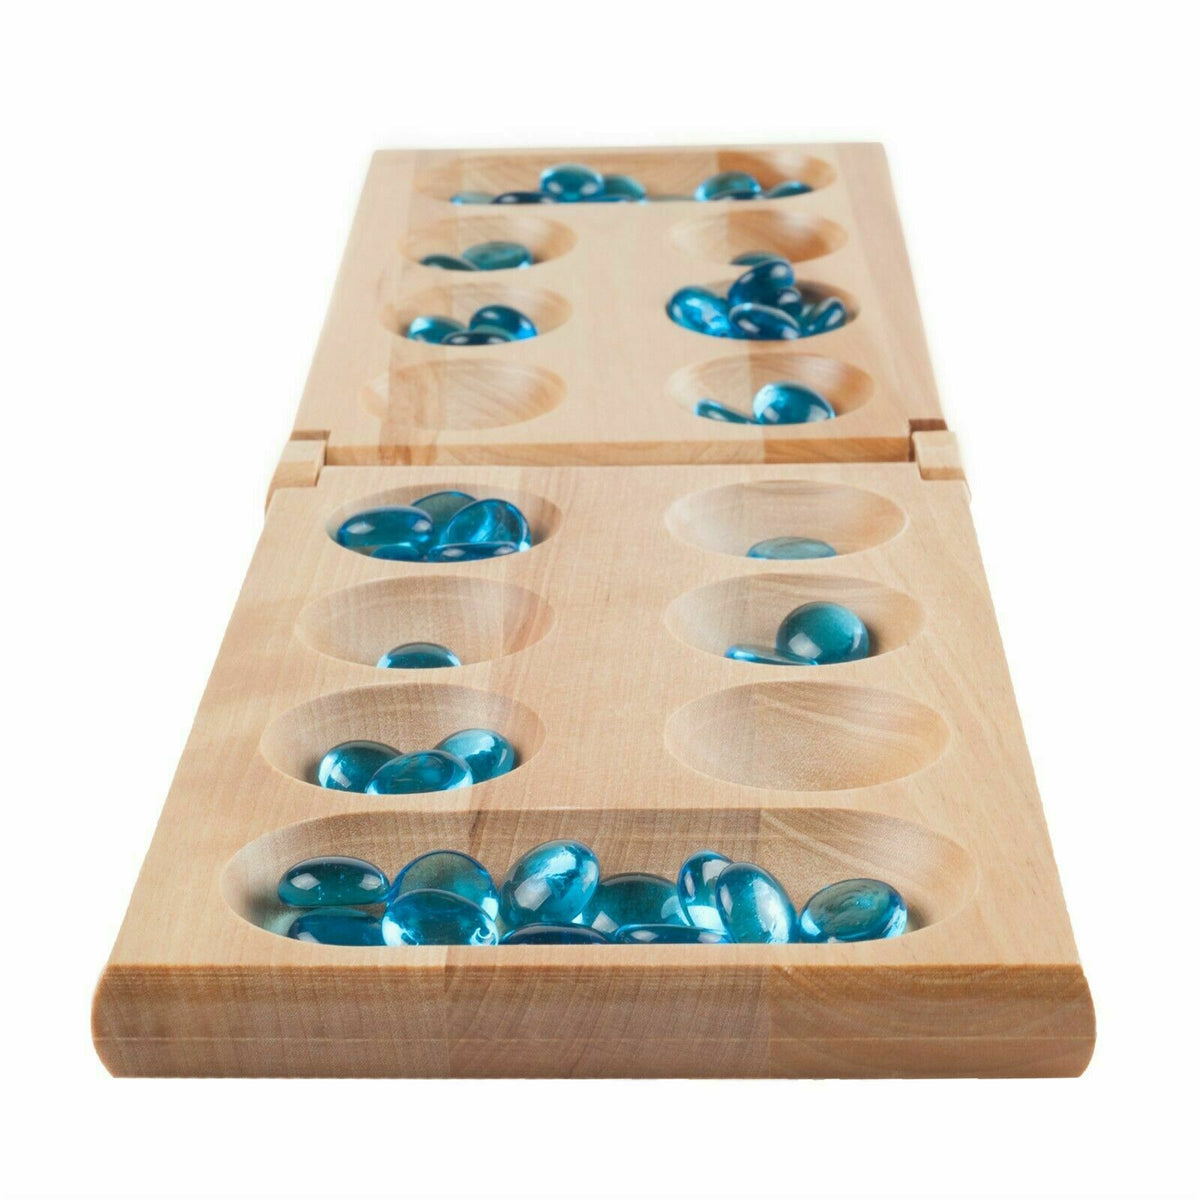 Folding Wooden Mancala Game with Blue Stones and Instructions